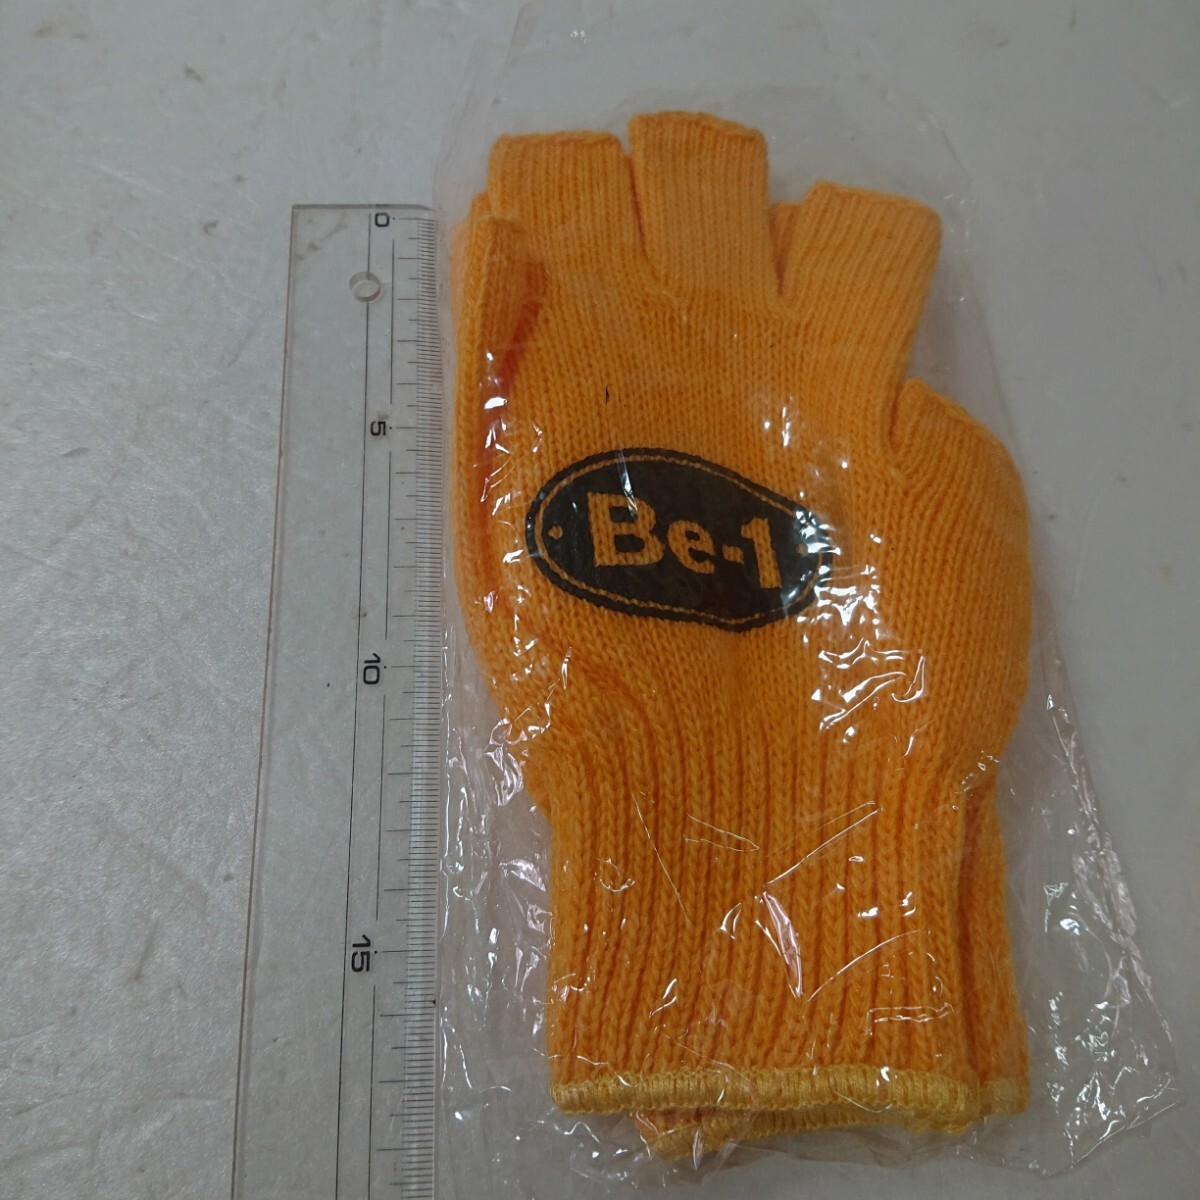  retro collection that time thing *NISSAN Nissan Nissan Be-1( Be * one ) Novelty souvenir not for sale Work glove army hand gloves 